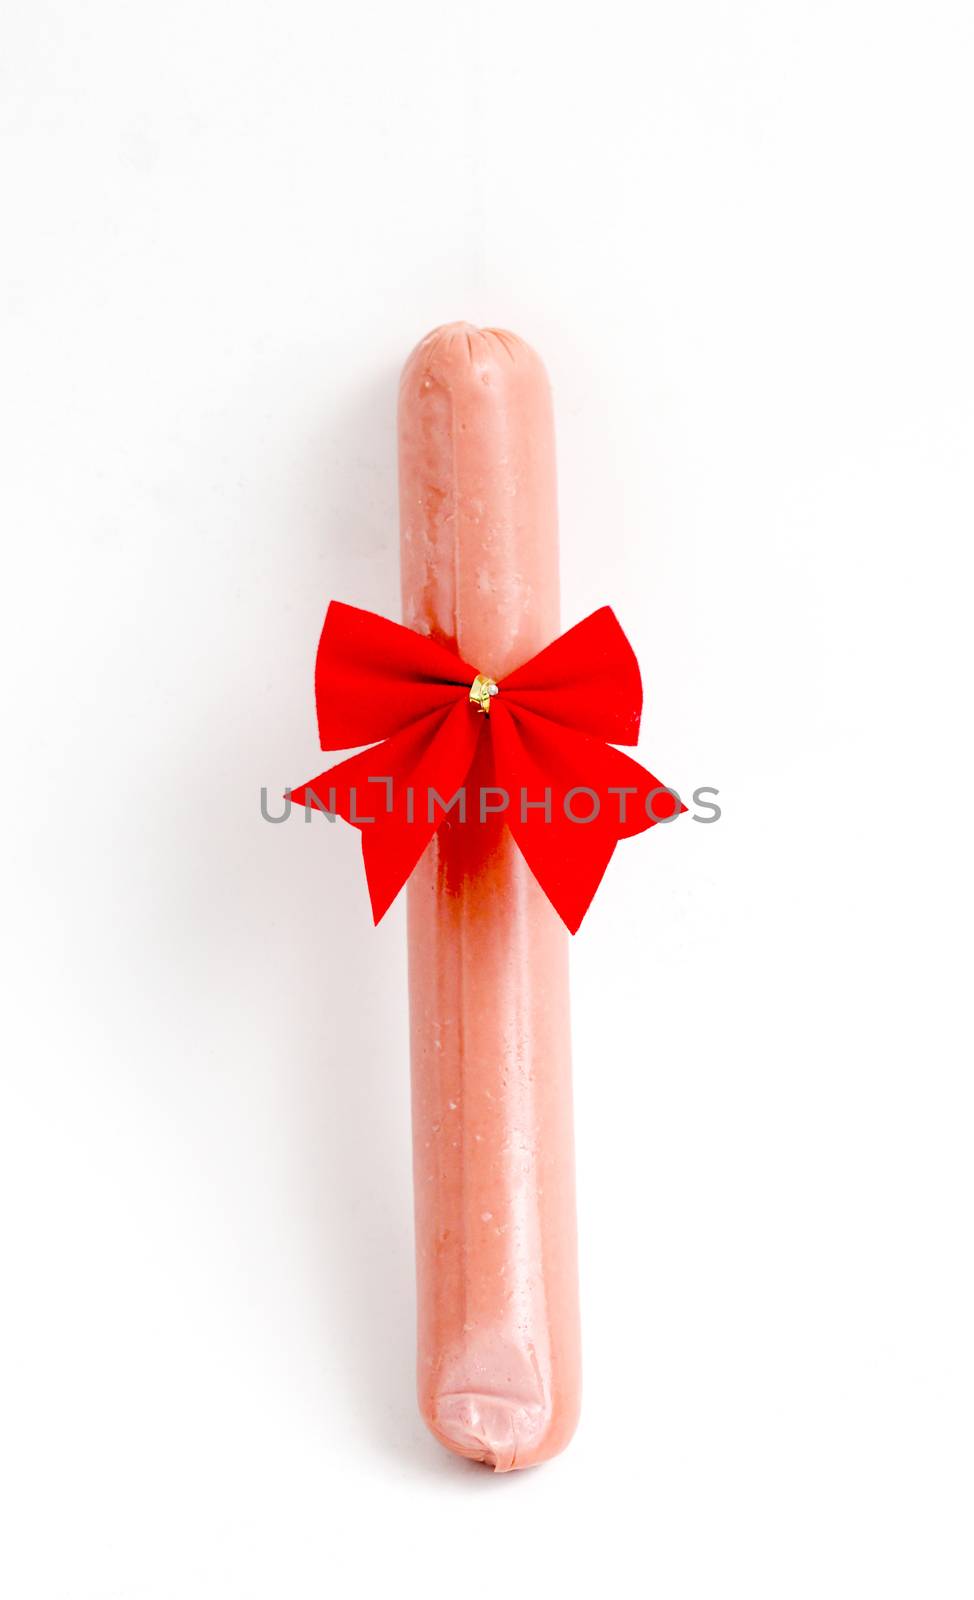 red ribbon bow-tie on a sausage on a white background